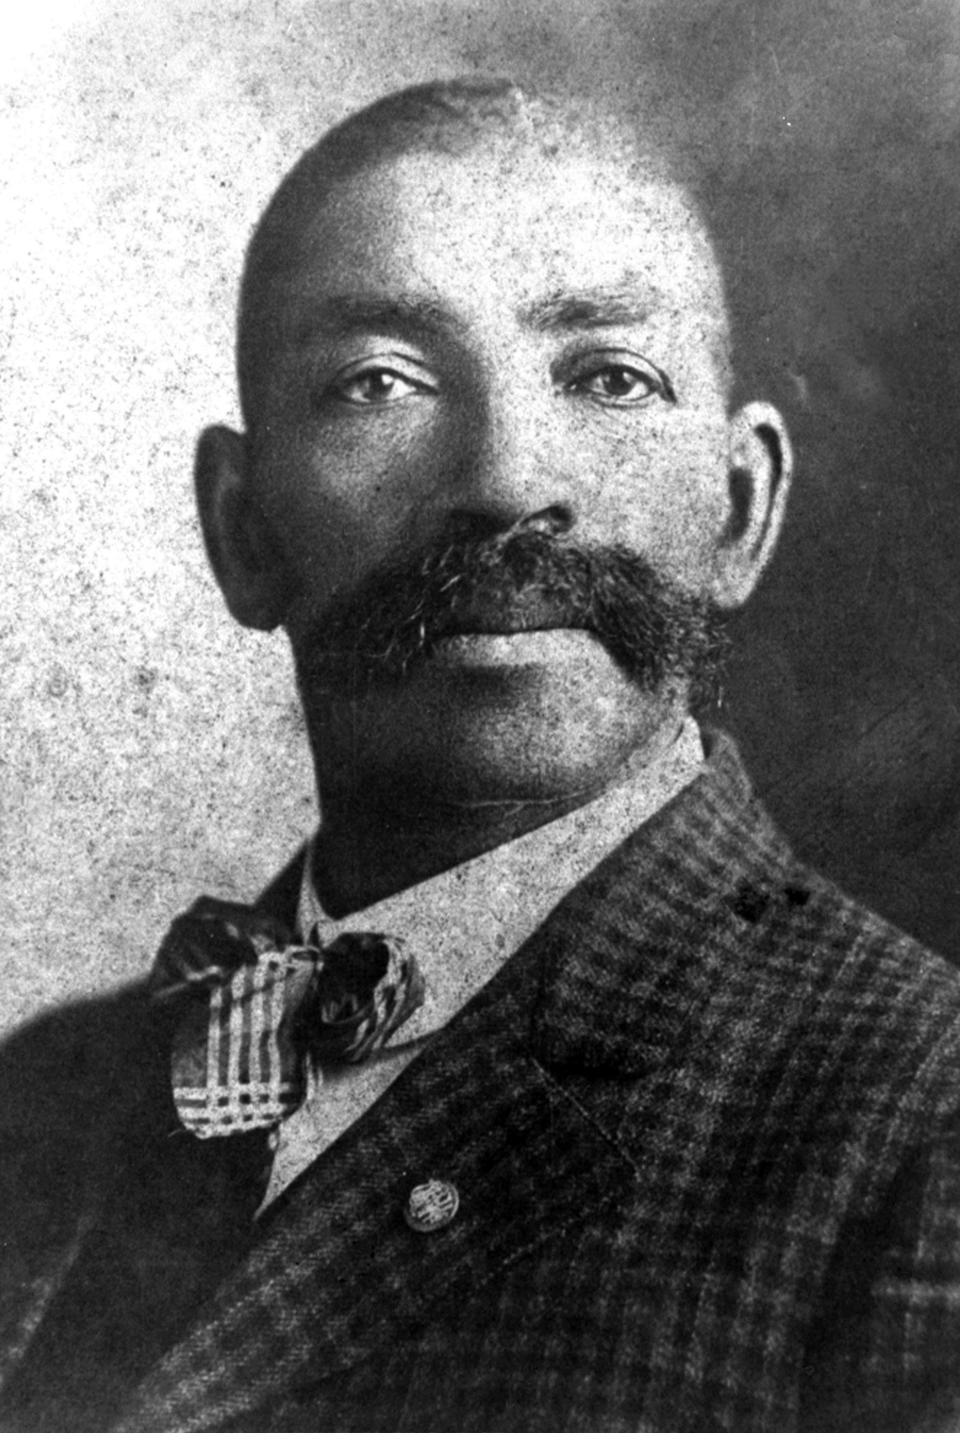 The real Marshal Bass Reeves, believed to be the first Black U.S. Marshal in the old west. He is the great-great-great grandfather of former Peoria Rivermen enforcer Ryan Reaves.